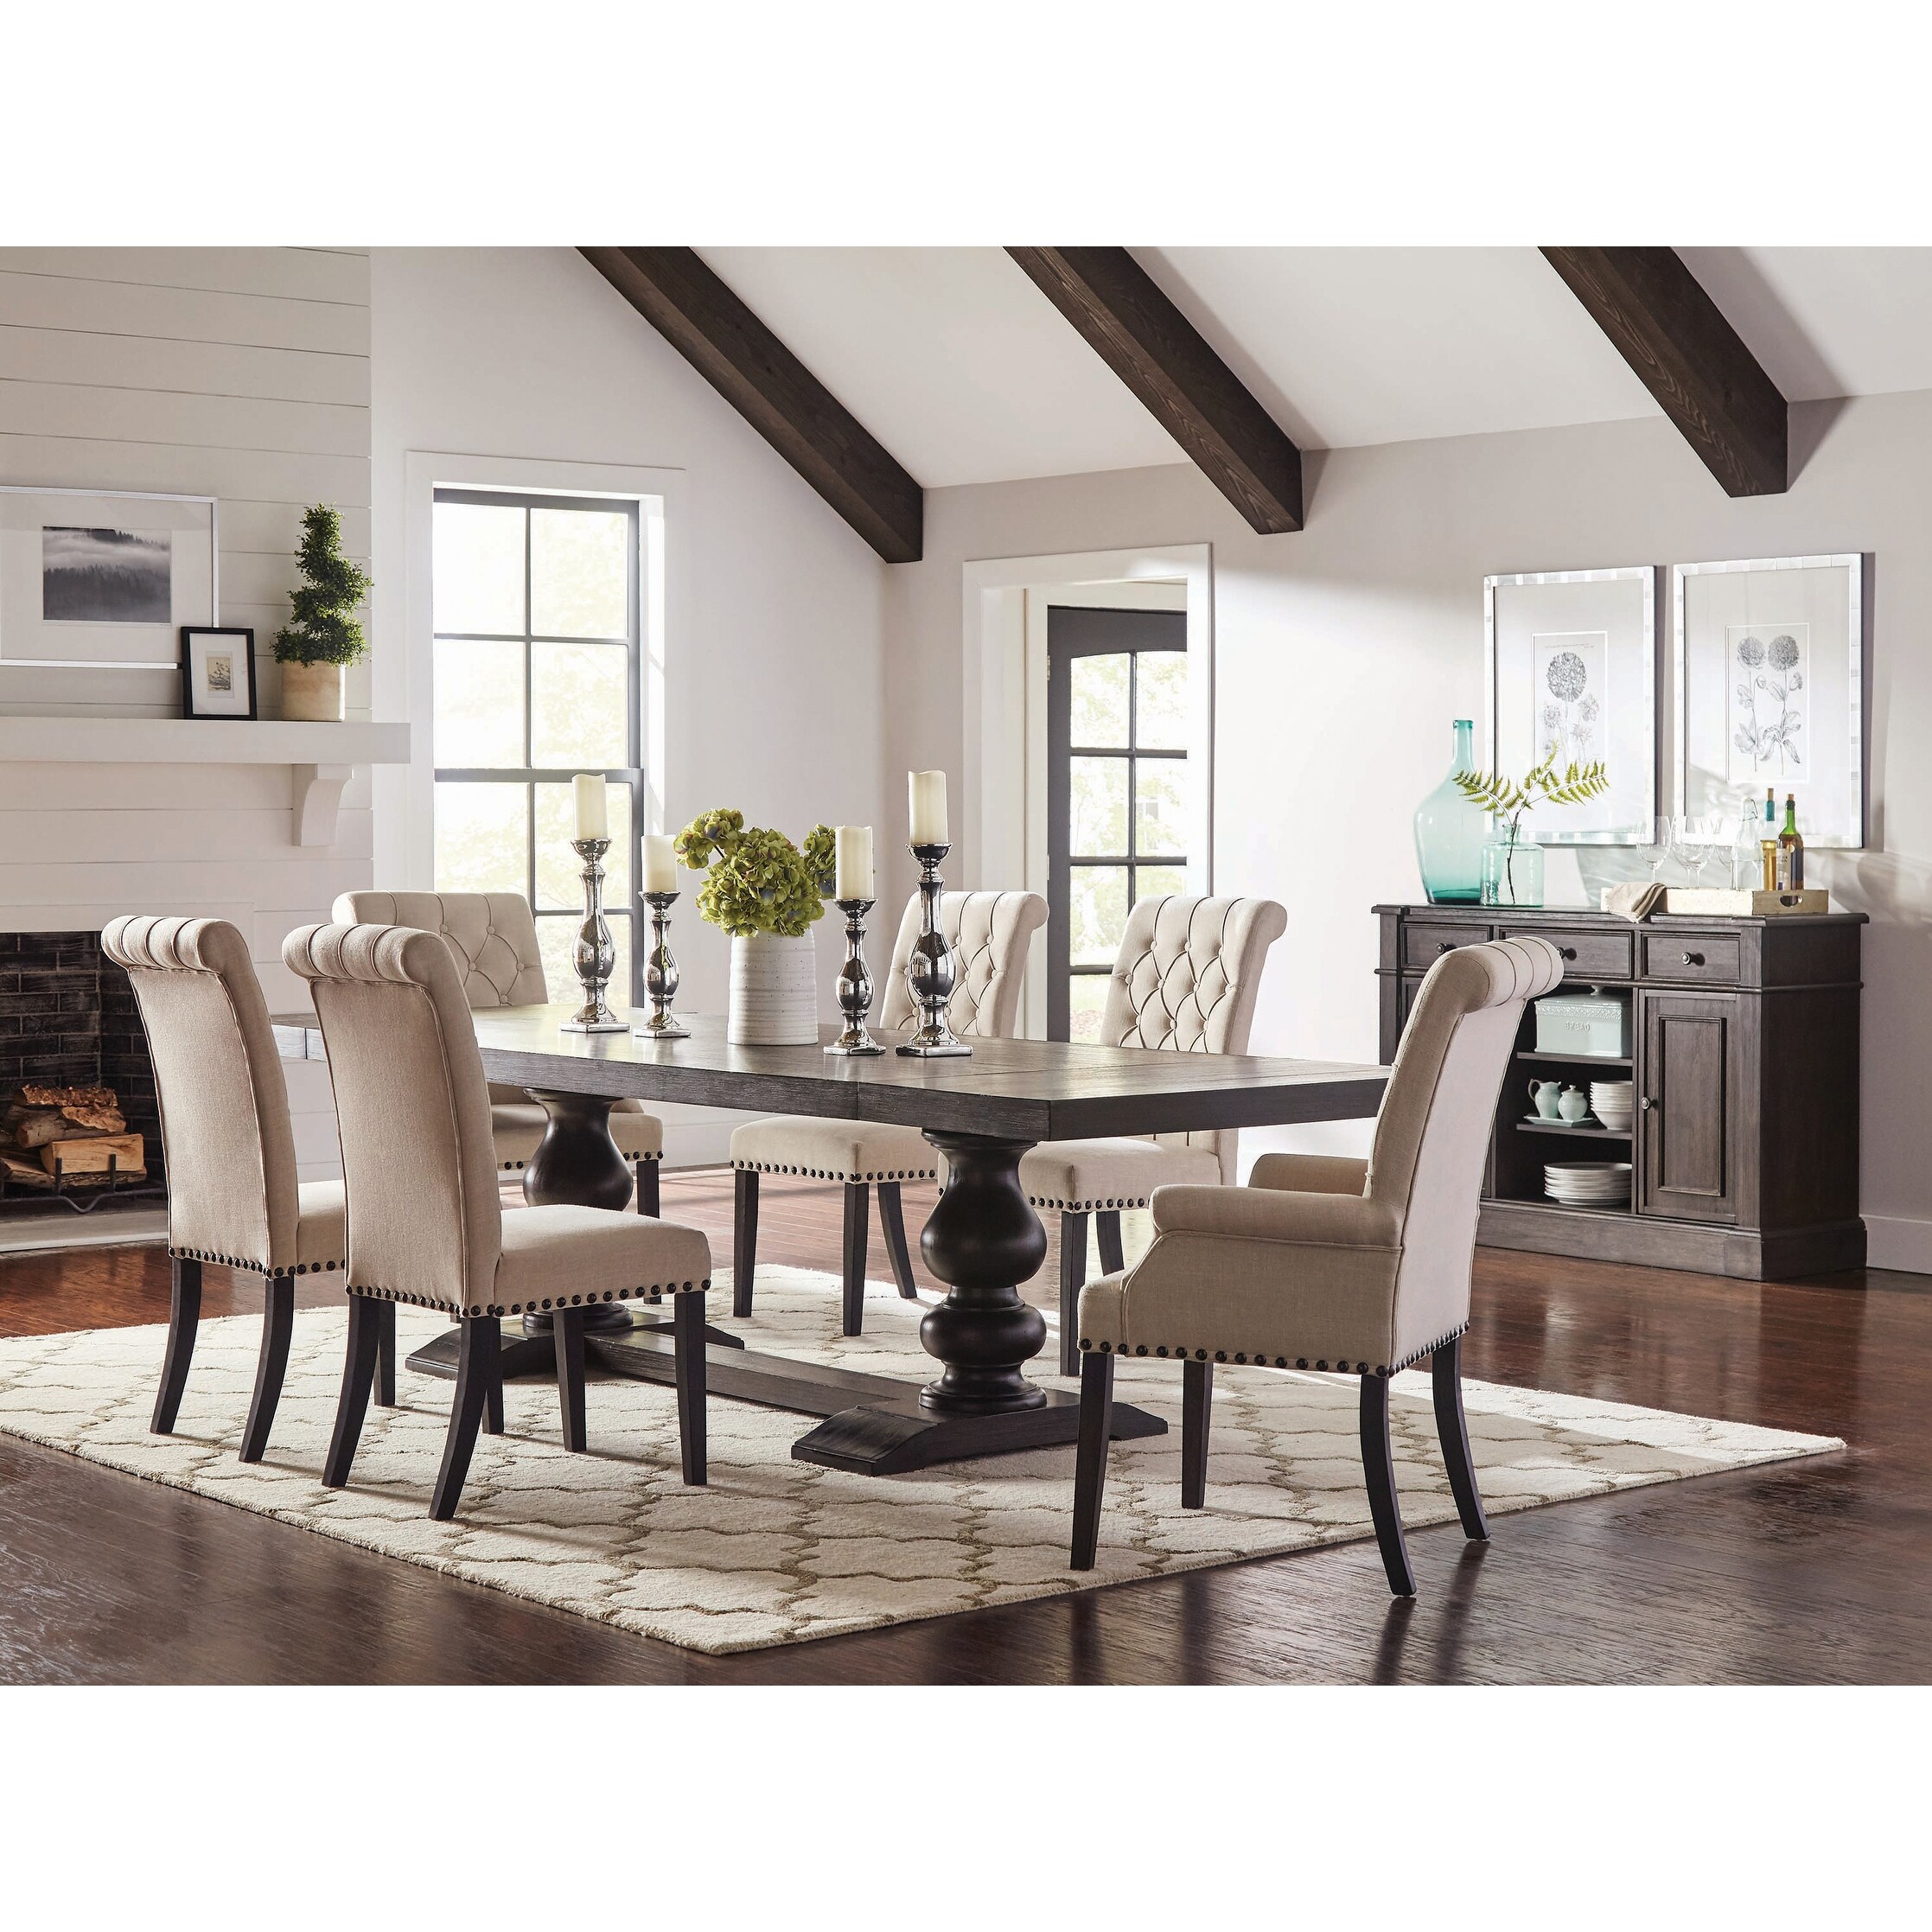 Chelsea Beige and Smokey Black Tufted Back Dining Chairs (Set of 6)